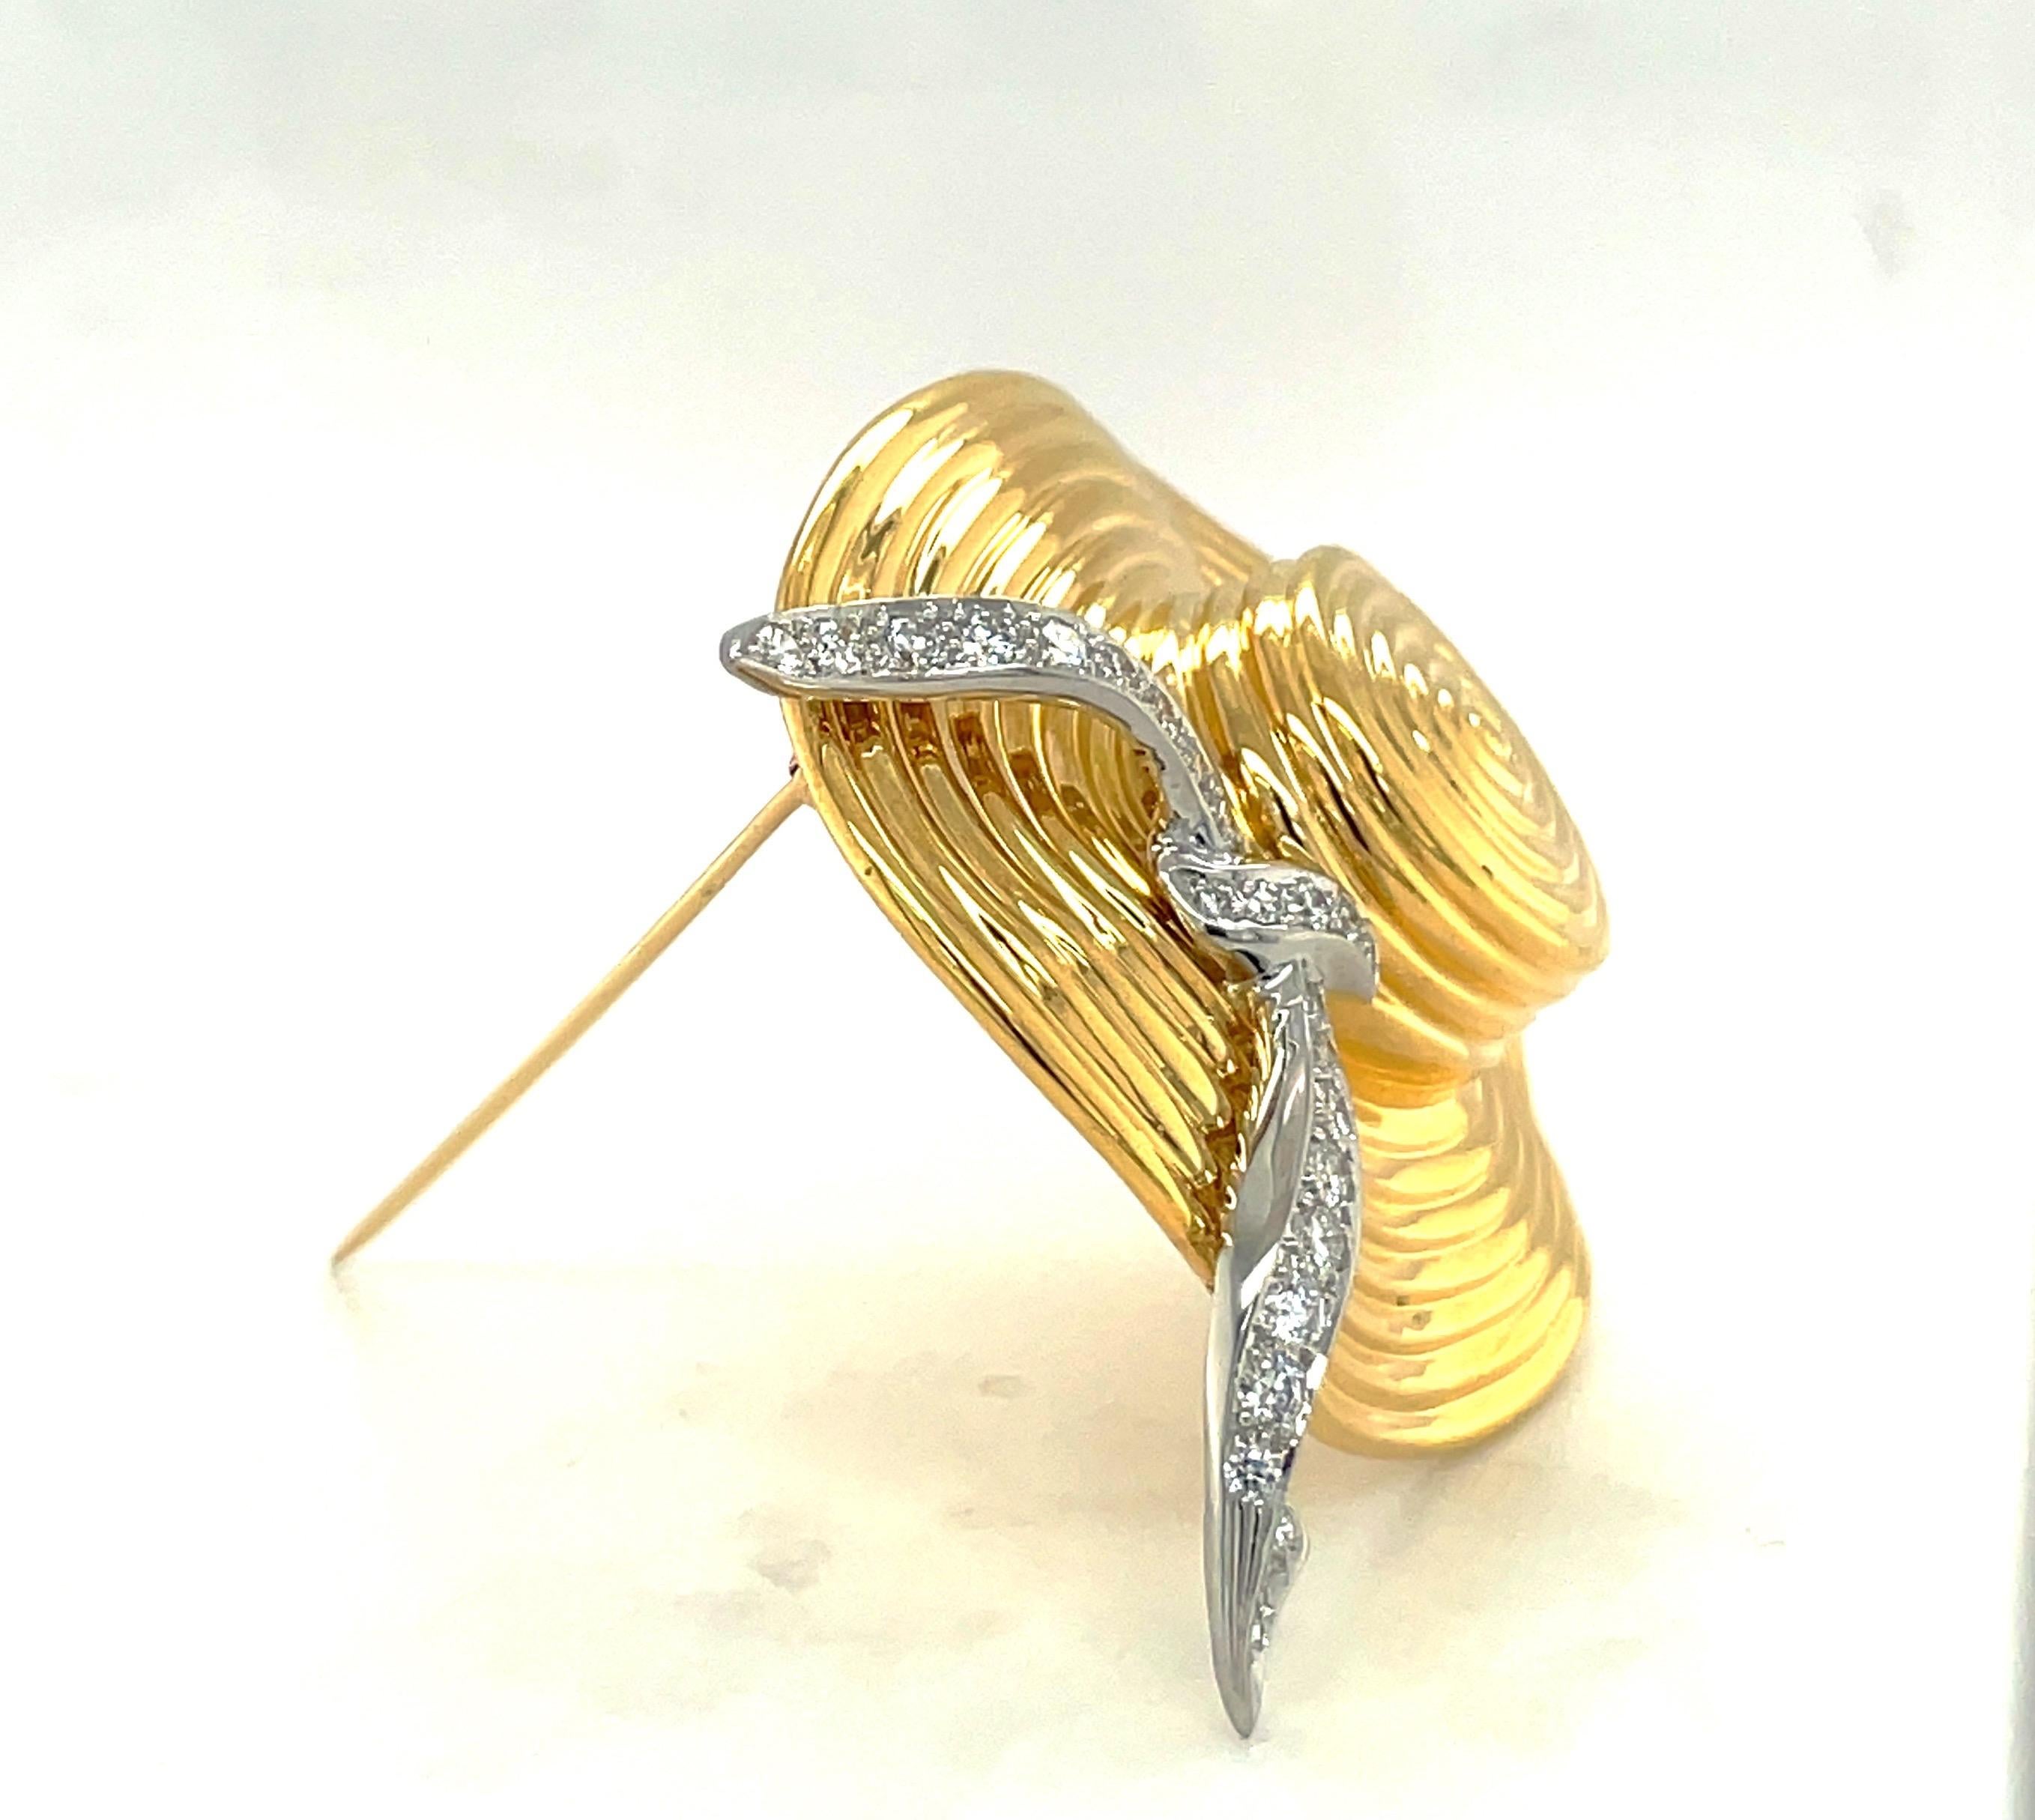 Designed by the legendary Charles Turi Jewelry Company.
This 18 karat yellow gold wide brim hat brooch has a platinum ribbon set with round brilliant diamonds.
The Brooch measures 2 inches wide by 1 1/2 inches long.
Total diamond weight 0.80 carats